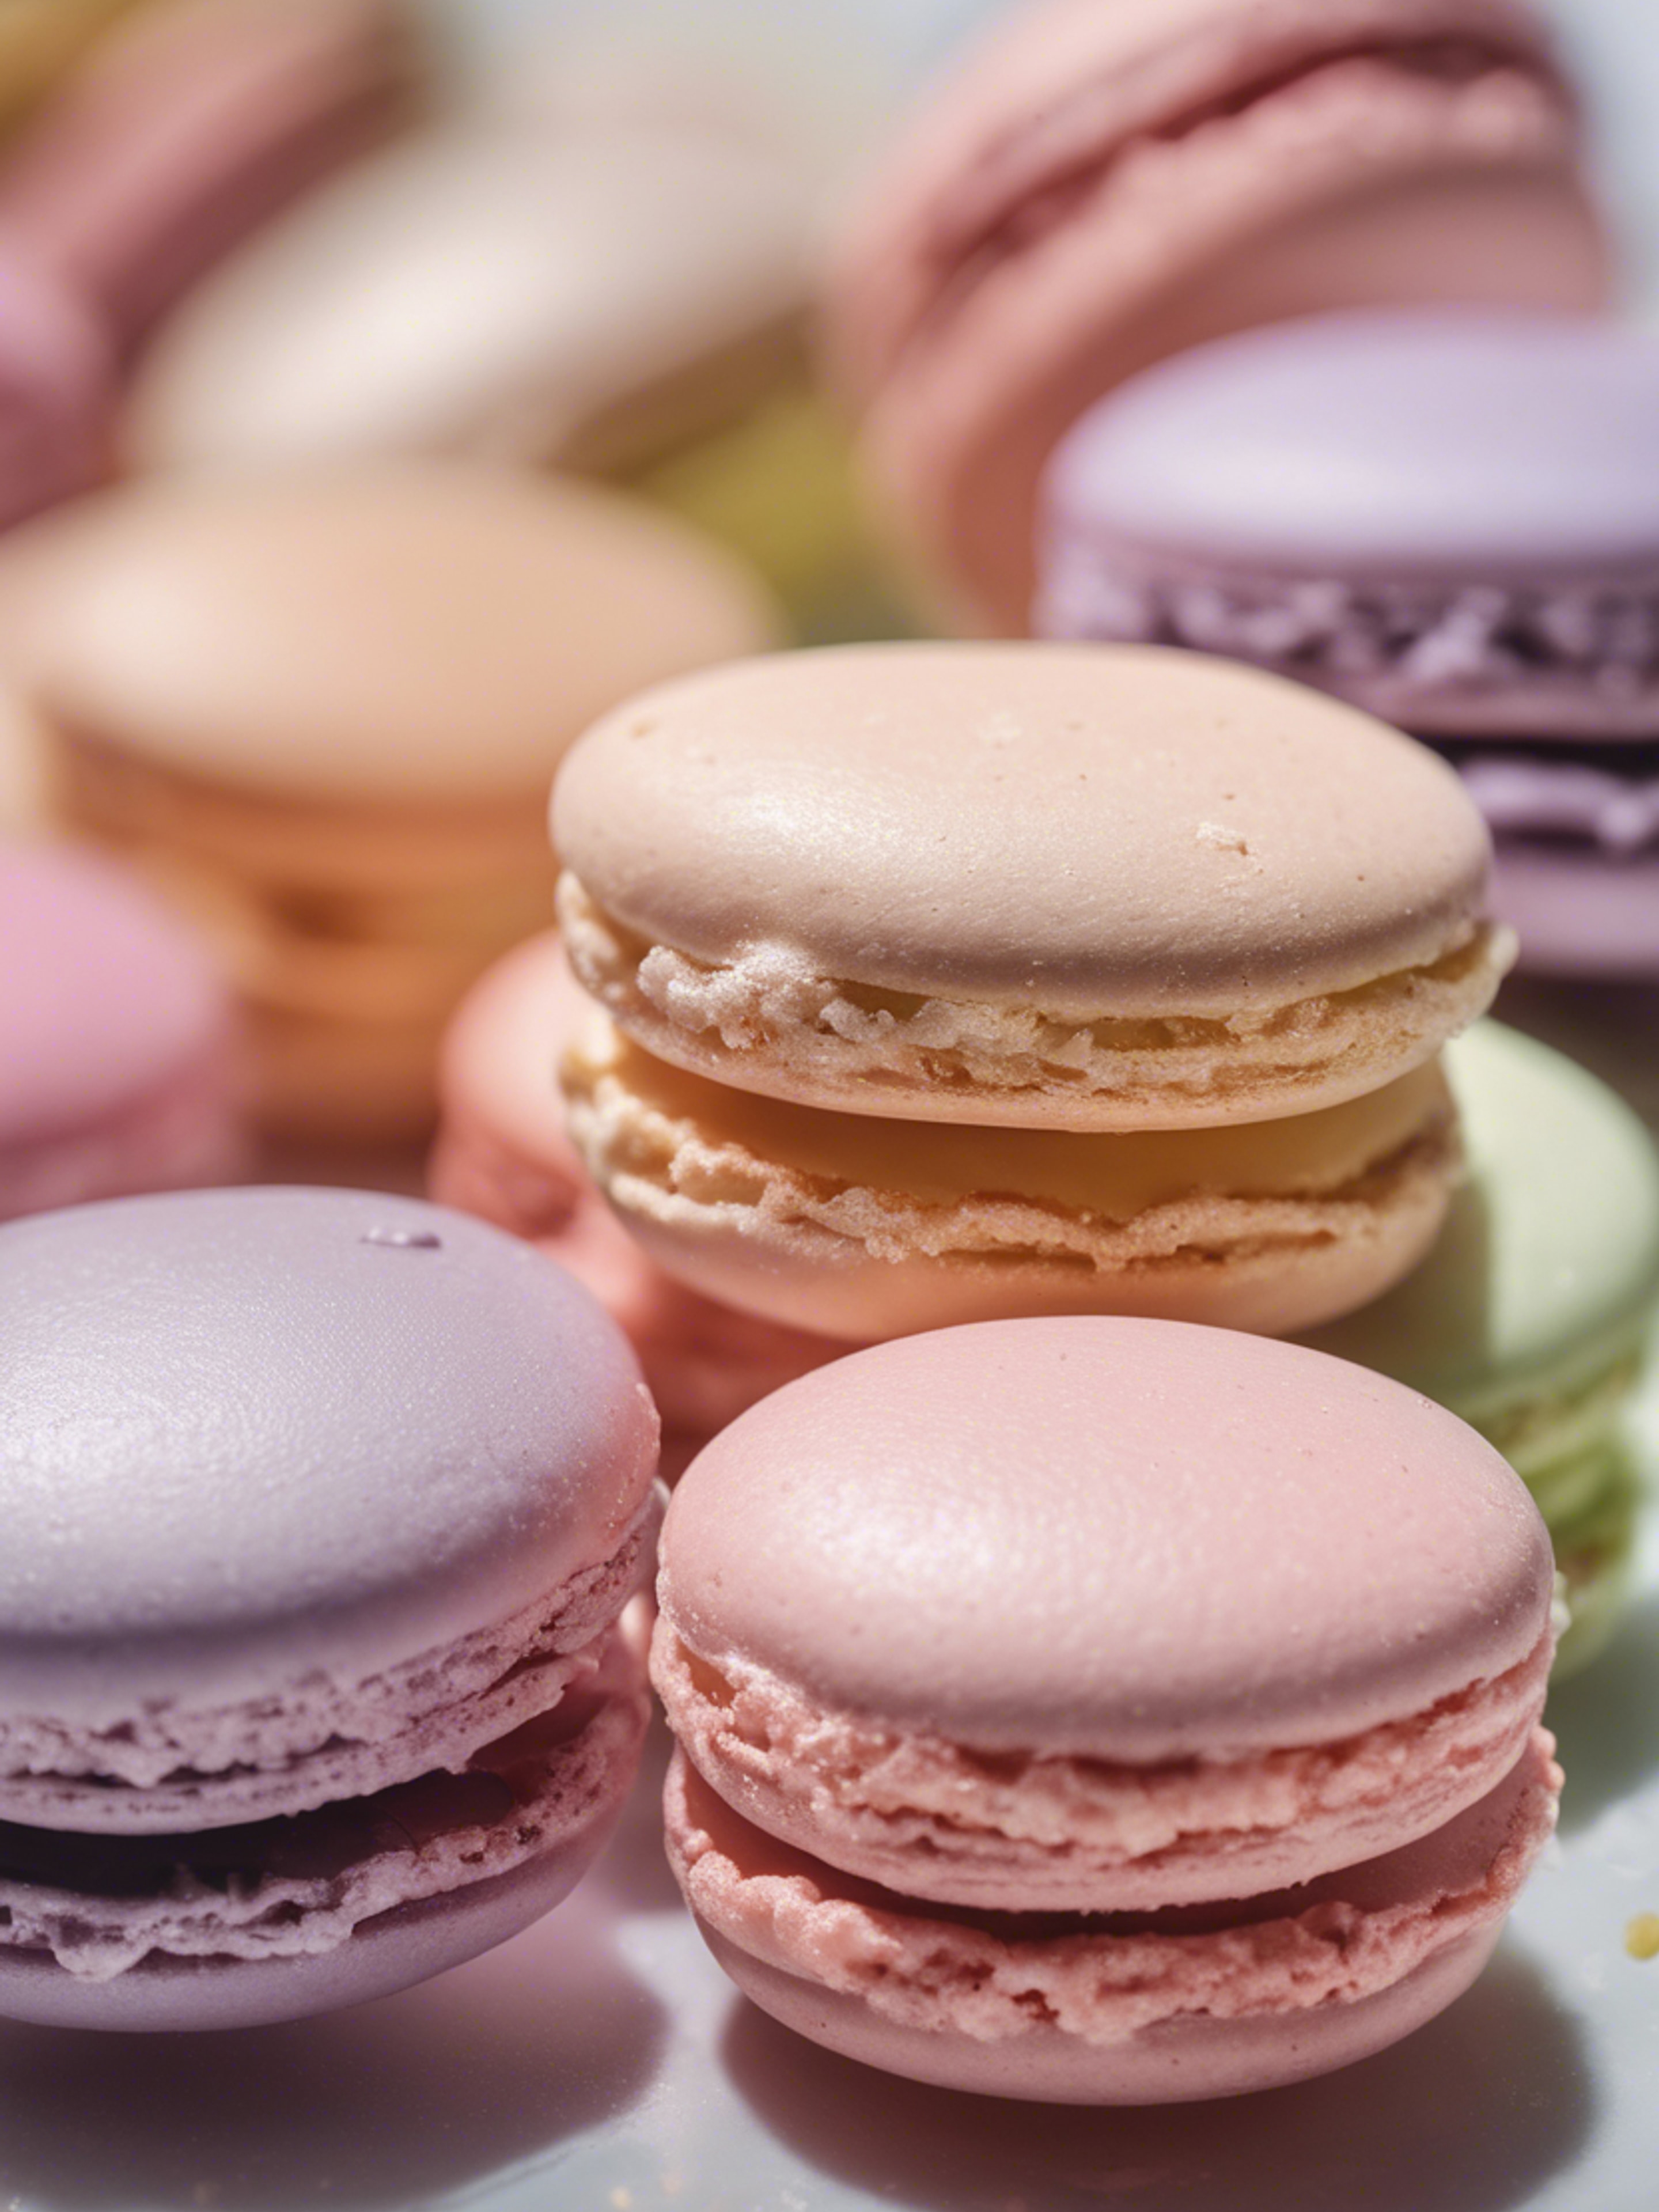 A close-up view of a cool pastel colored macaron making process. Hintergrund[347d58695ee94000a1fc]